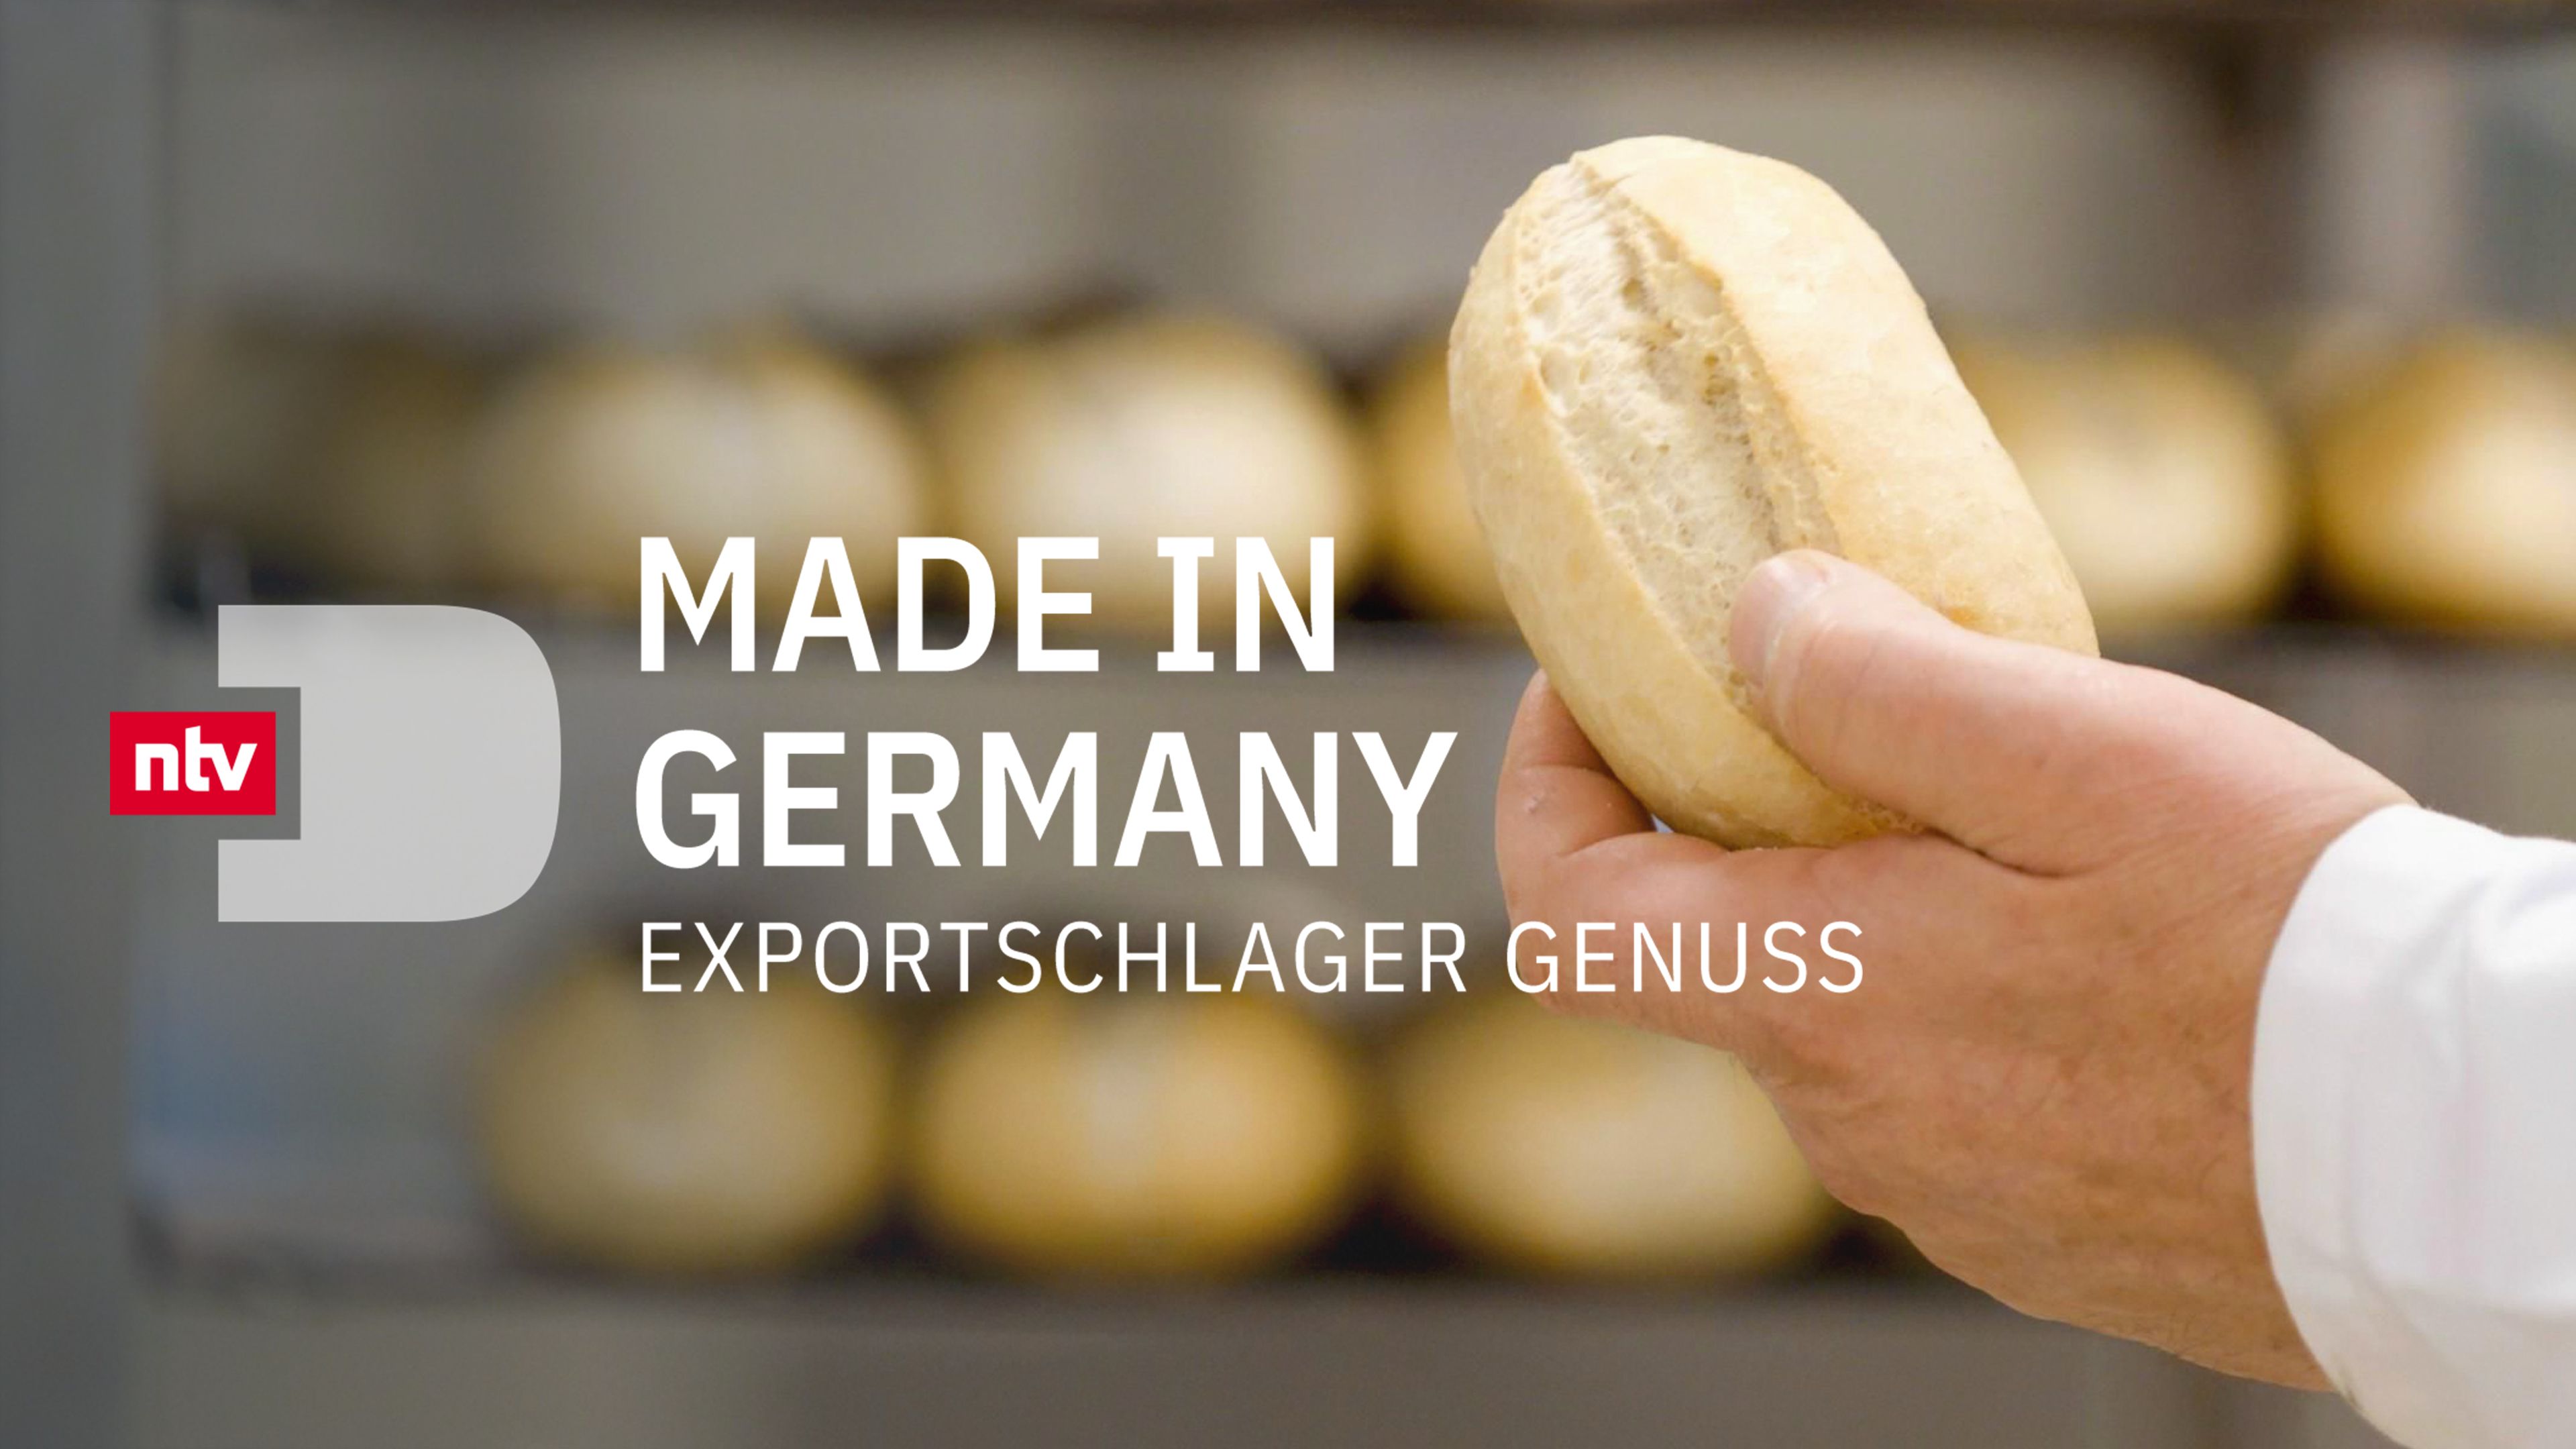 Made in Germany - Exportschlager Genuss